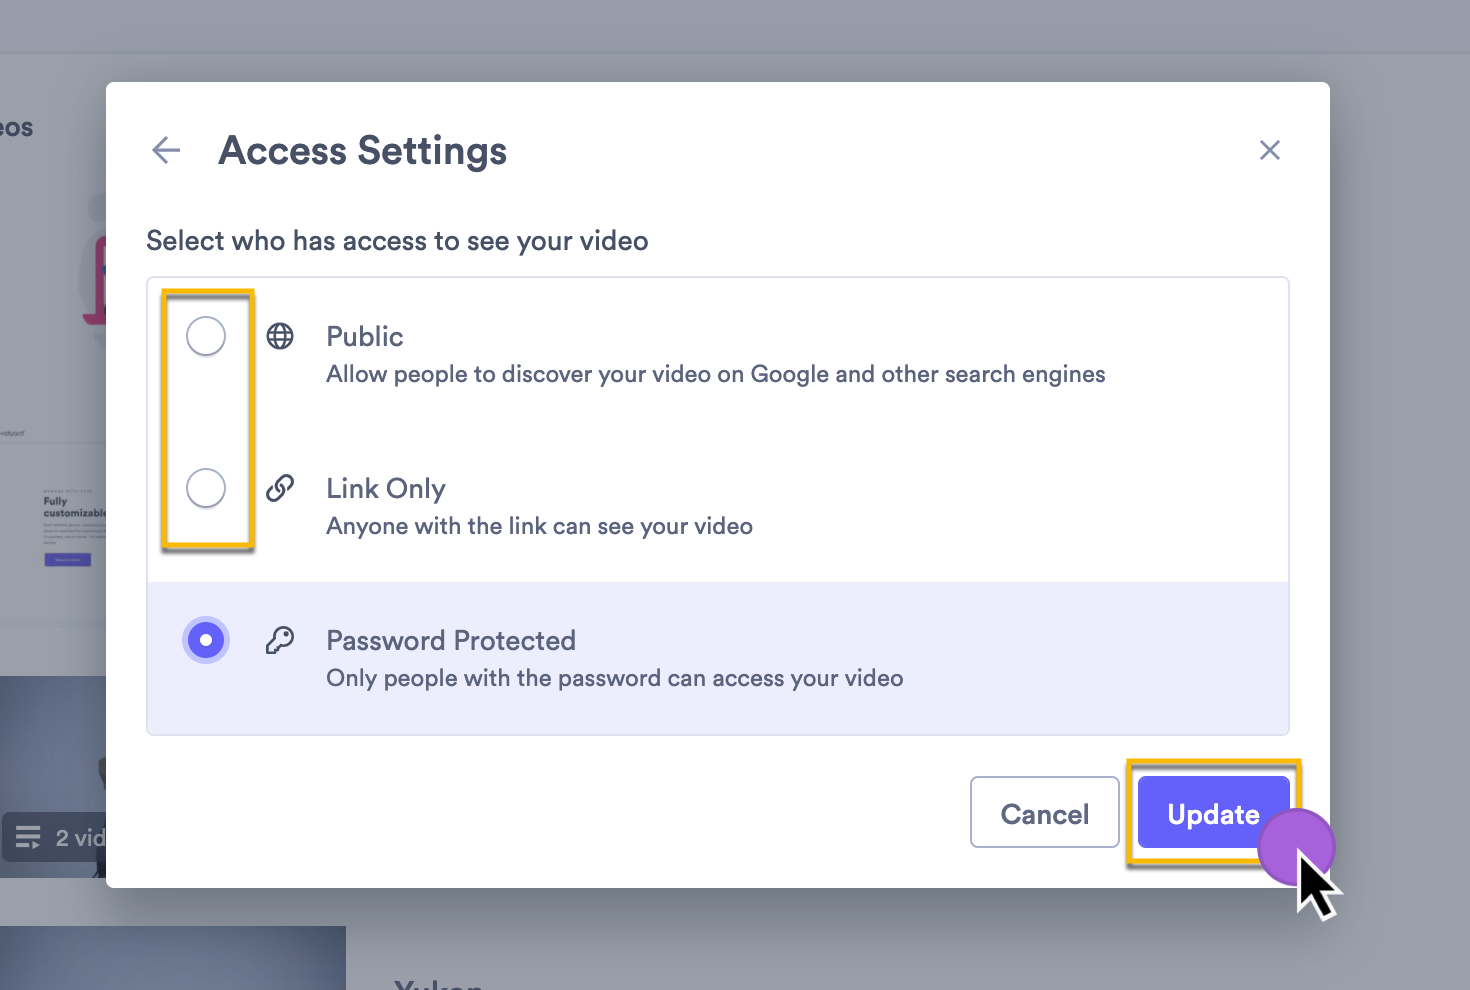 Selecting a different access setting for the video, like Link Only or Public